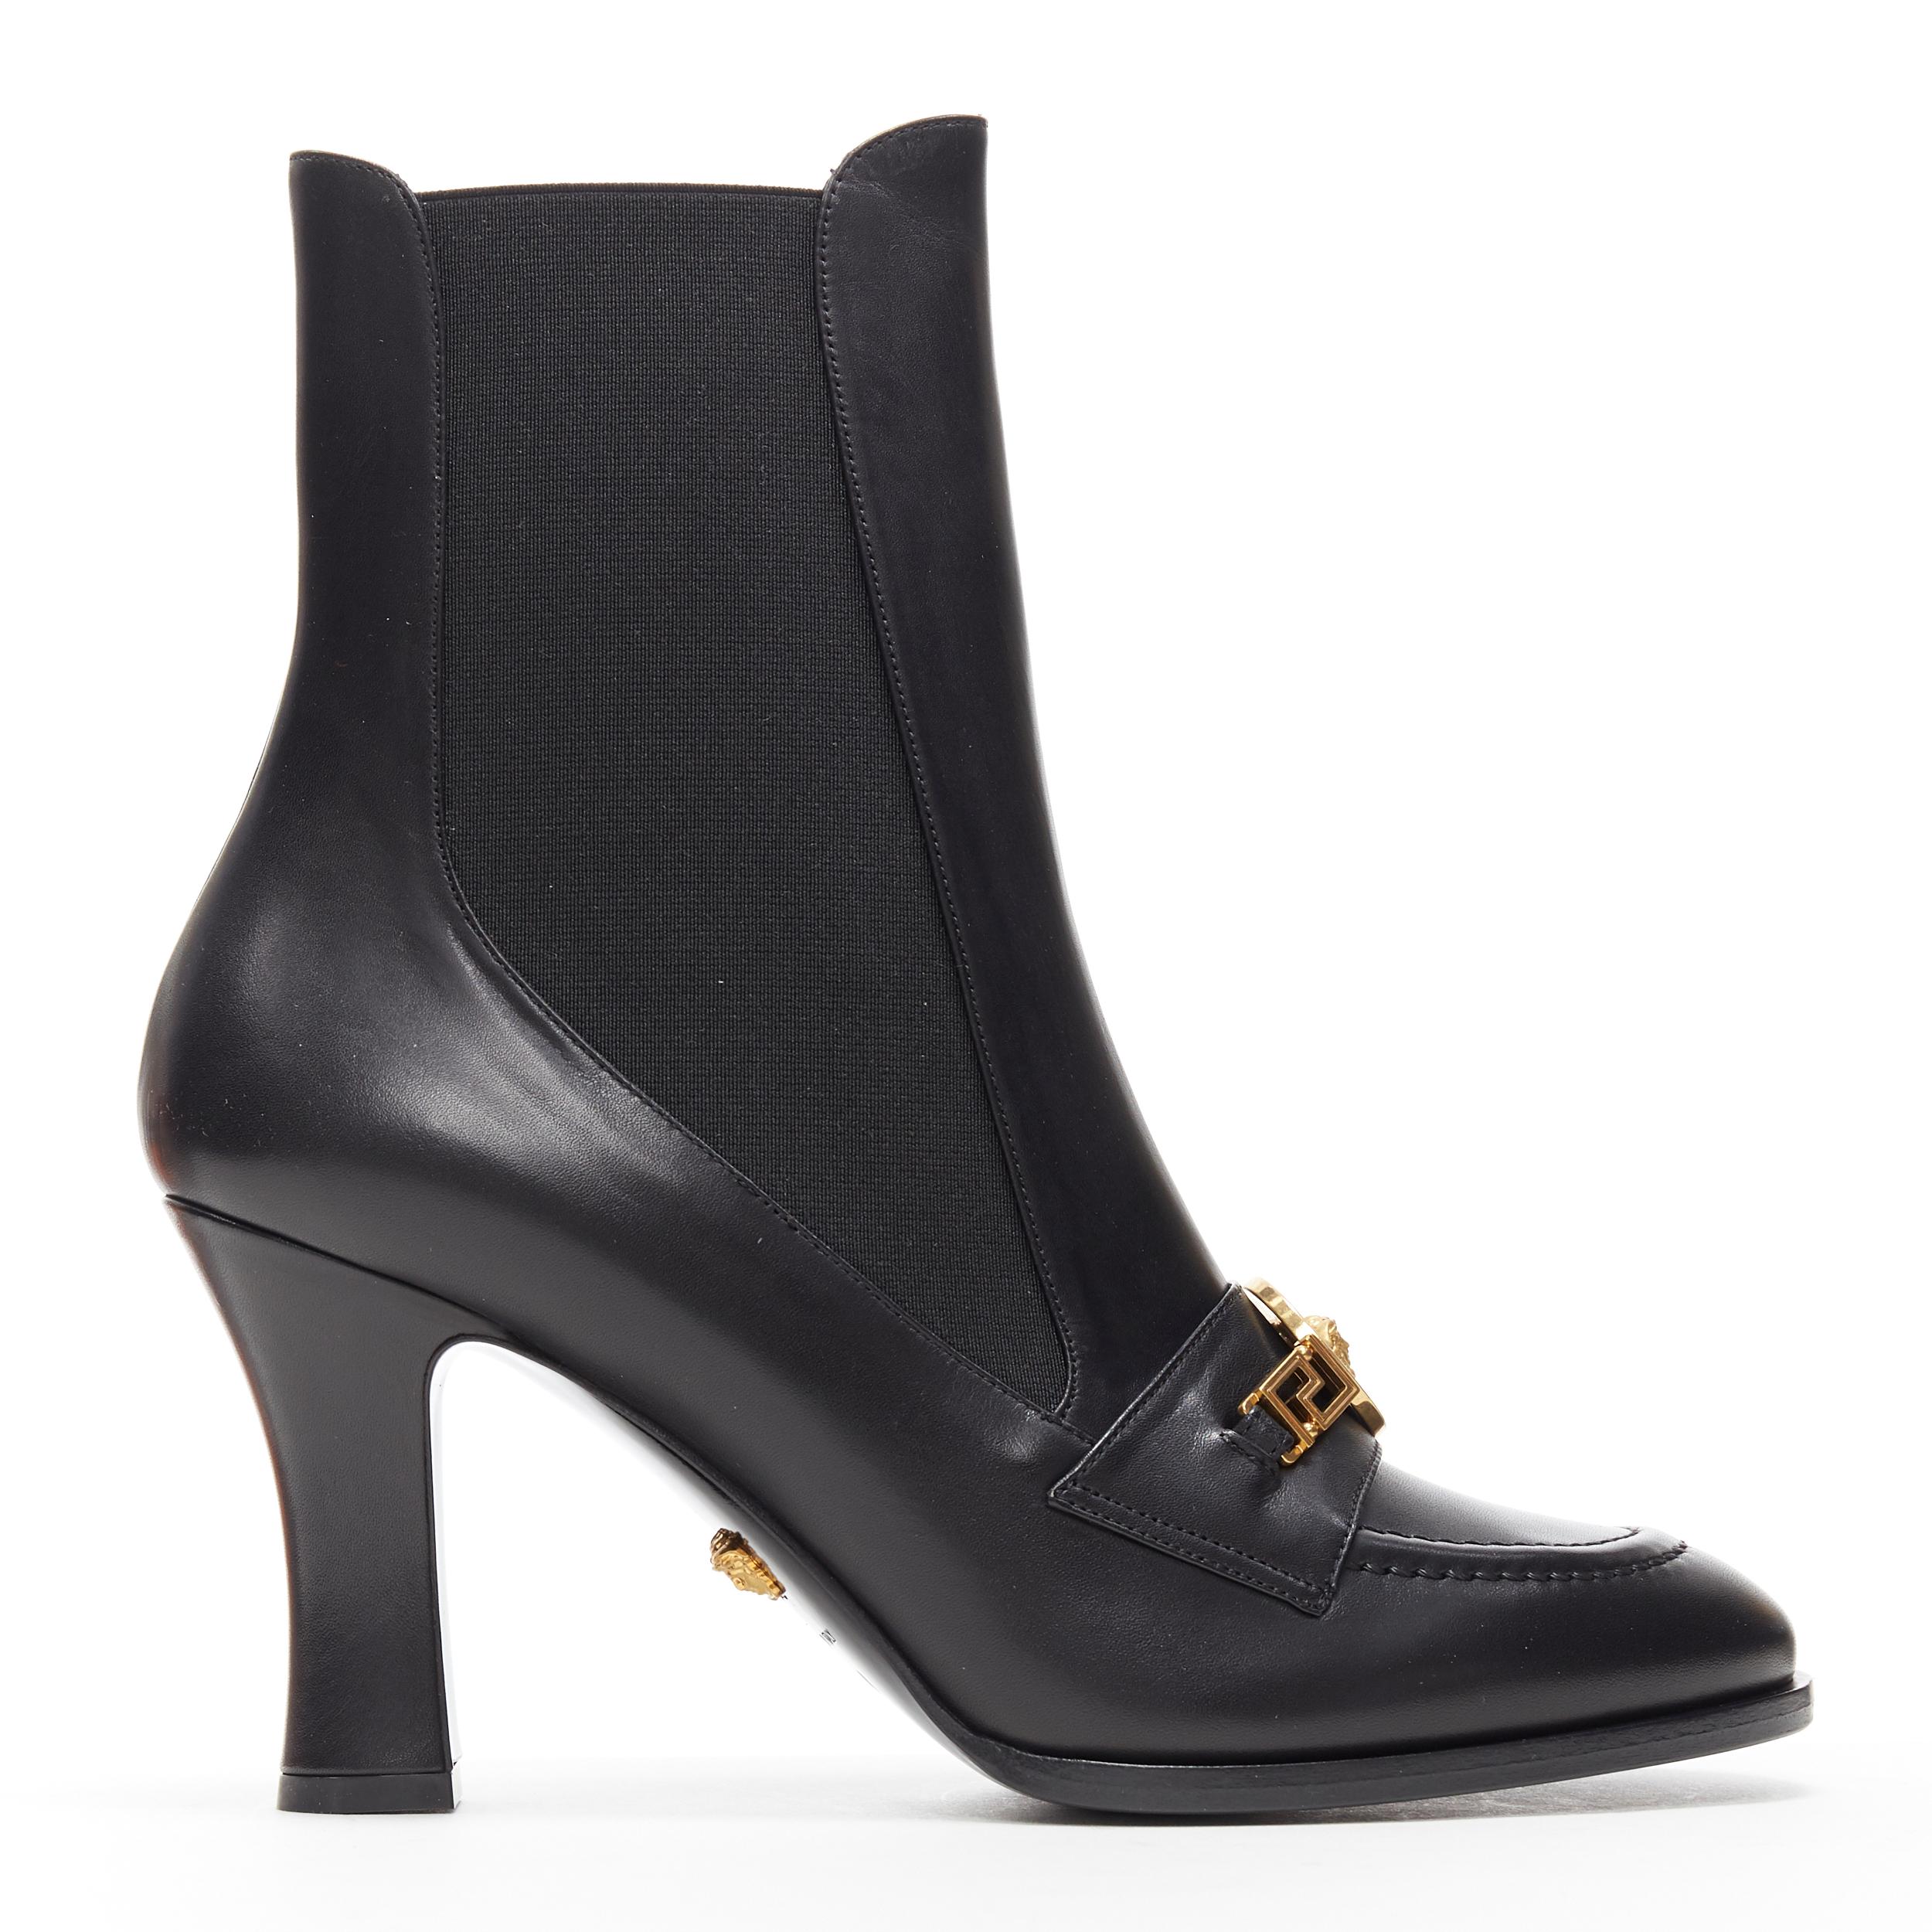 new VERSACE Runway Tribute black Medusa greca chain high heel loafer boots EU37
Brand: Versace
Designer: Donatella Versace
Collection: Spring Summer 2018
Model Name / Style: Loafer boots
Material: Leather
Color: Black
Pattern: Solid
Extra Detail: